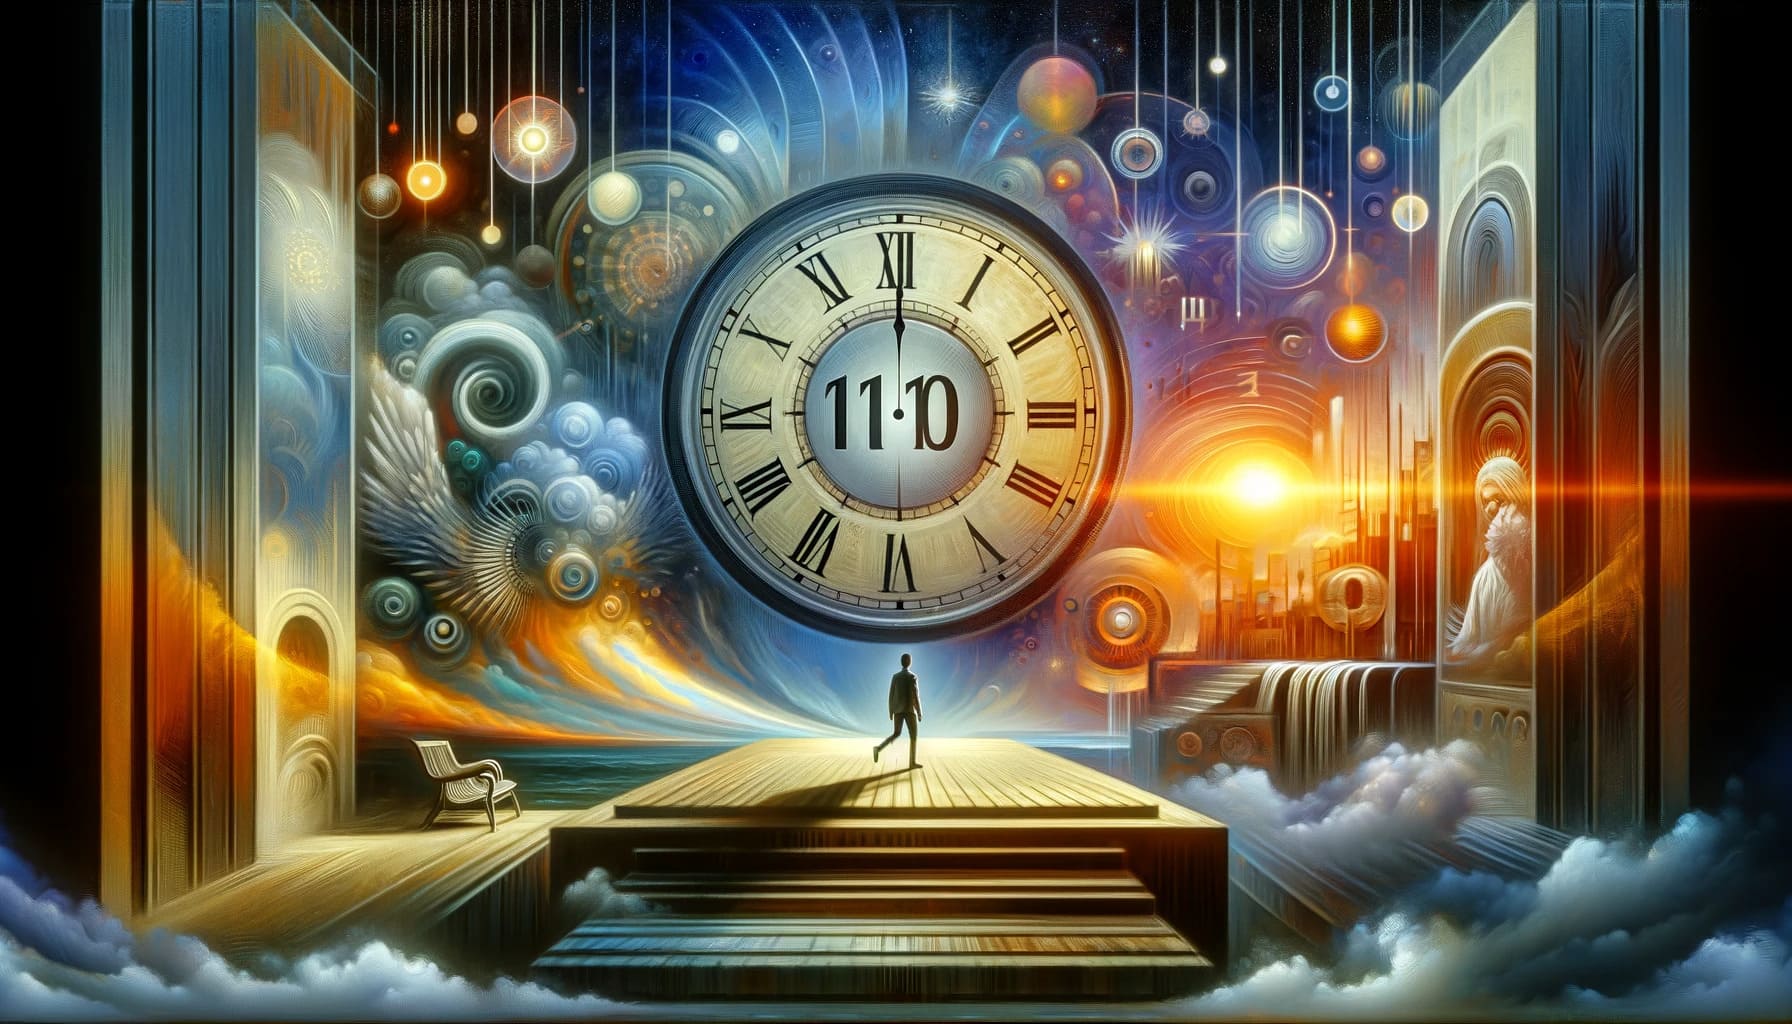 What Does 11 10 Mean in Dreams